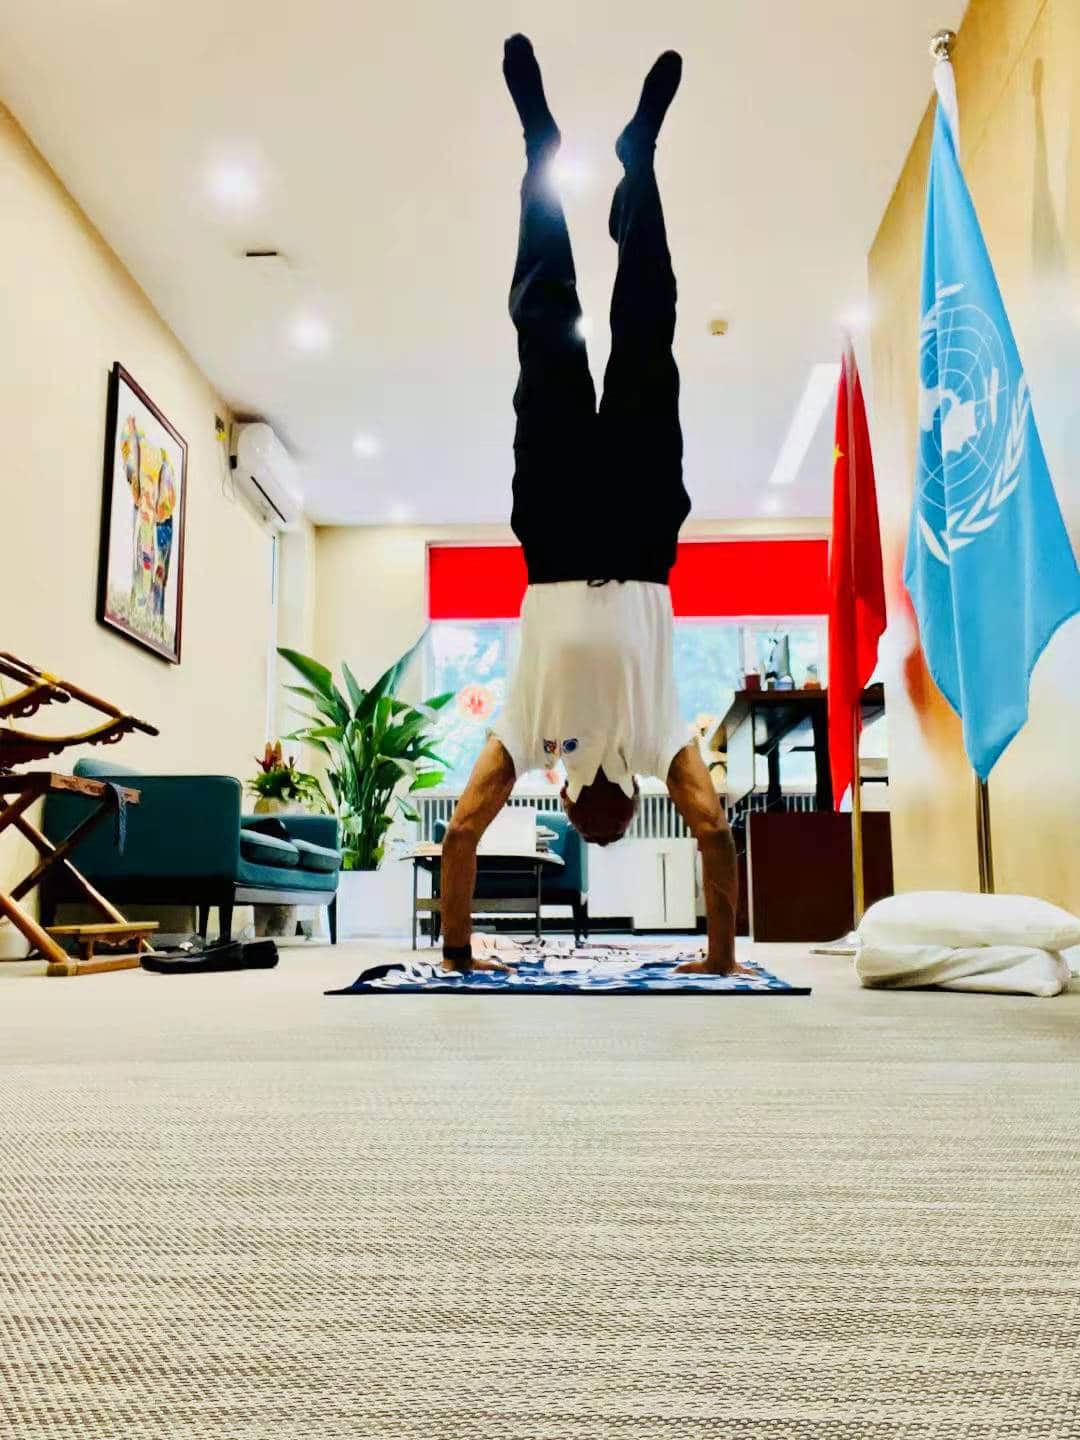 Siddharth Chatterjee practicing handstand at office during lunch break